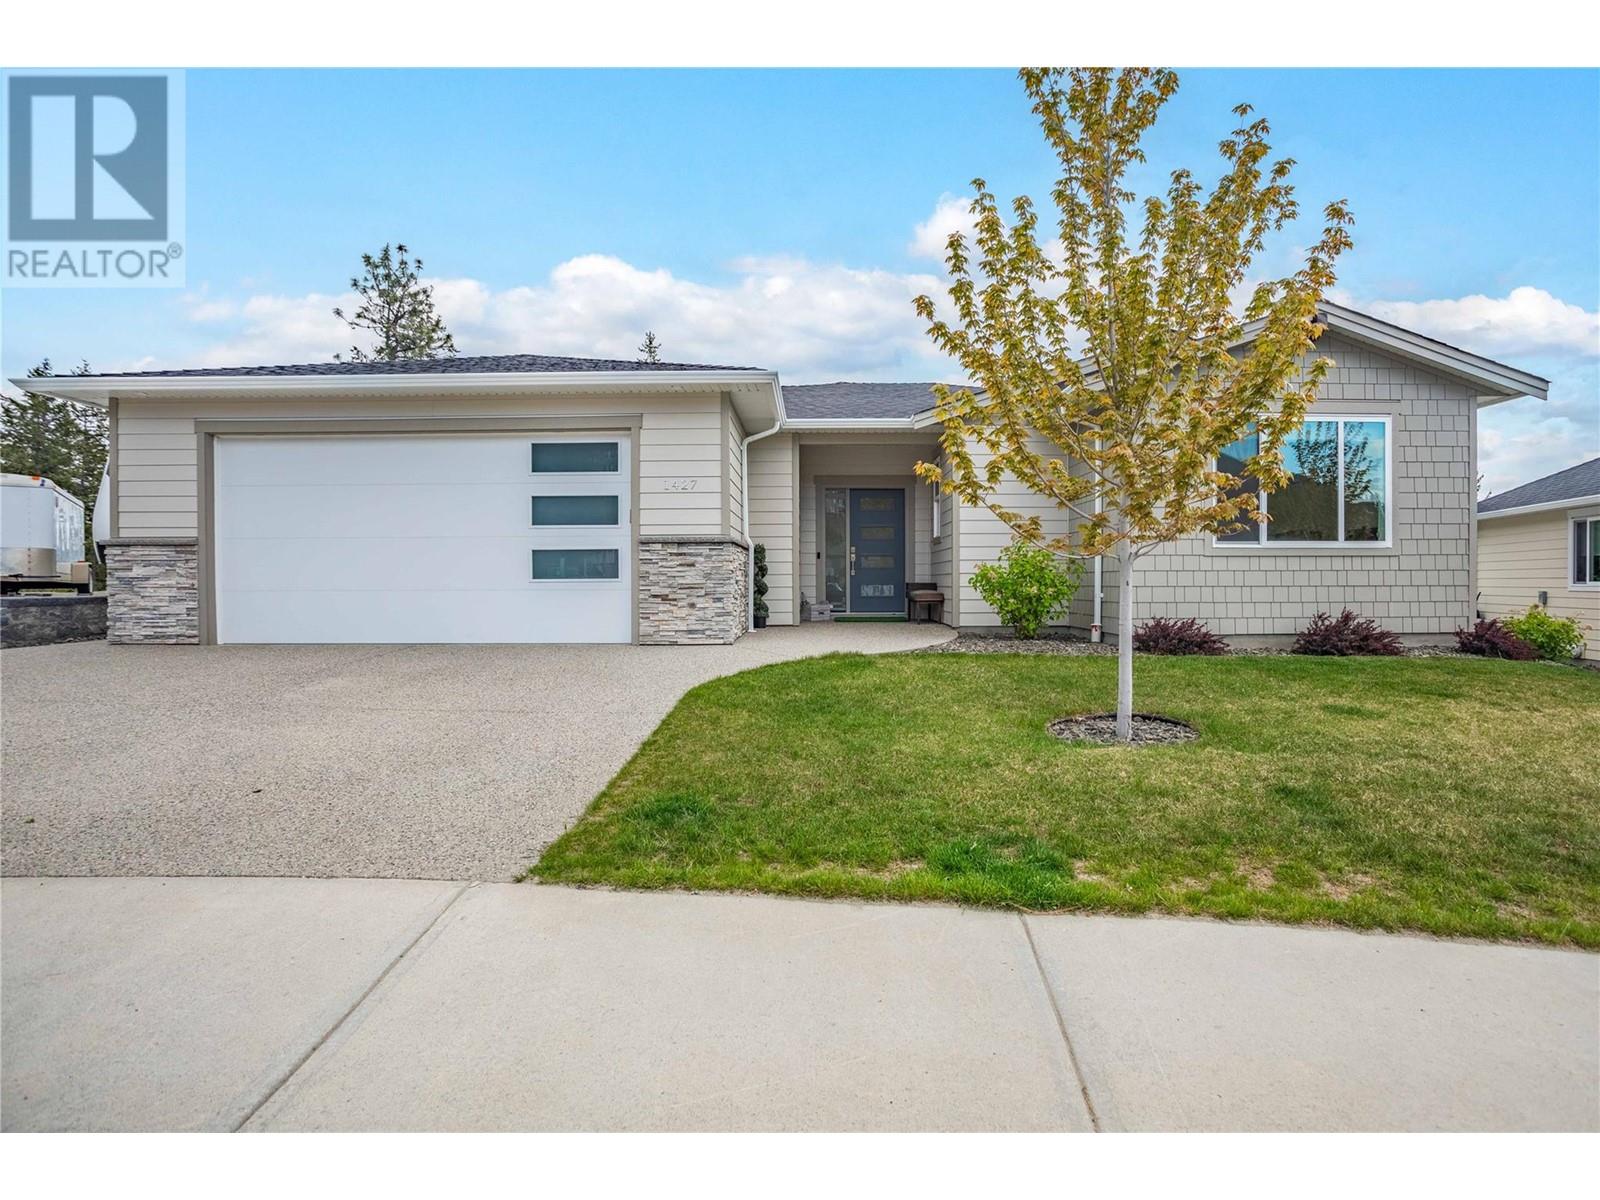 1427 Rose Hill Place, West Kelowna, British Columbia  V1Z 4A7 - Photo 1 - 10313242